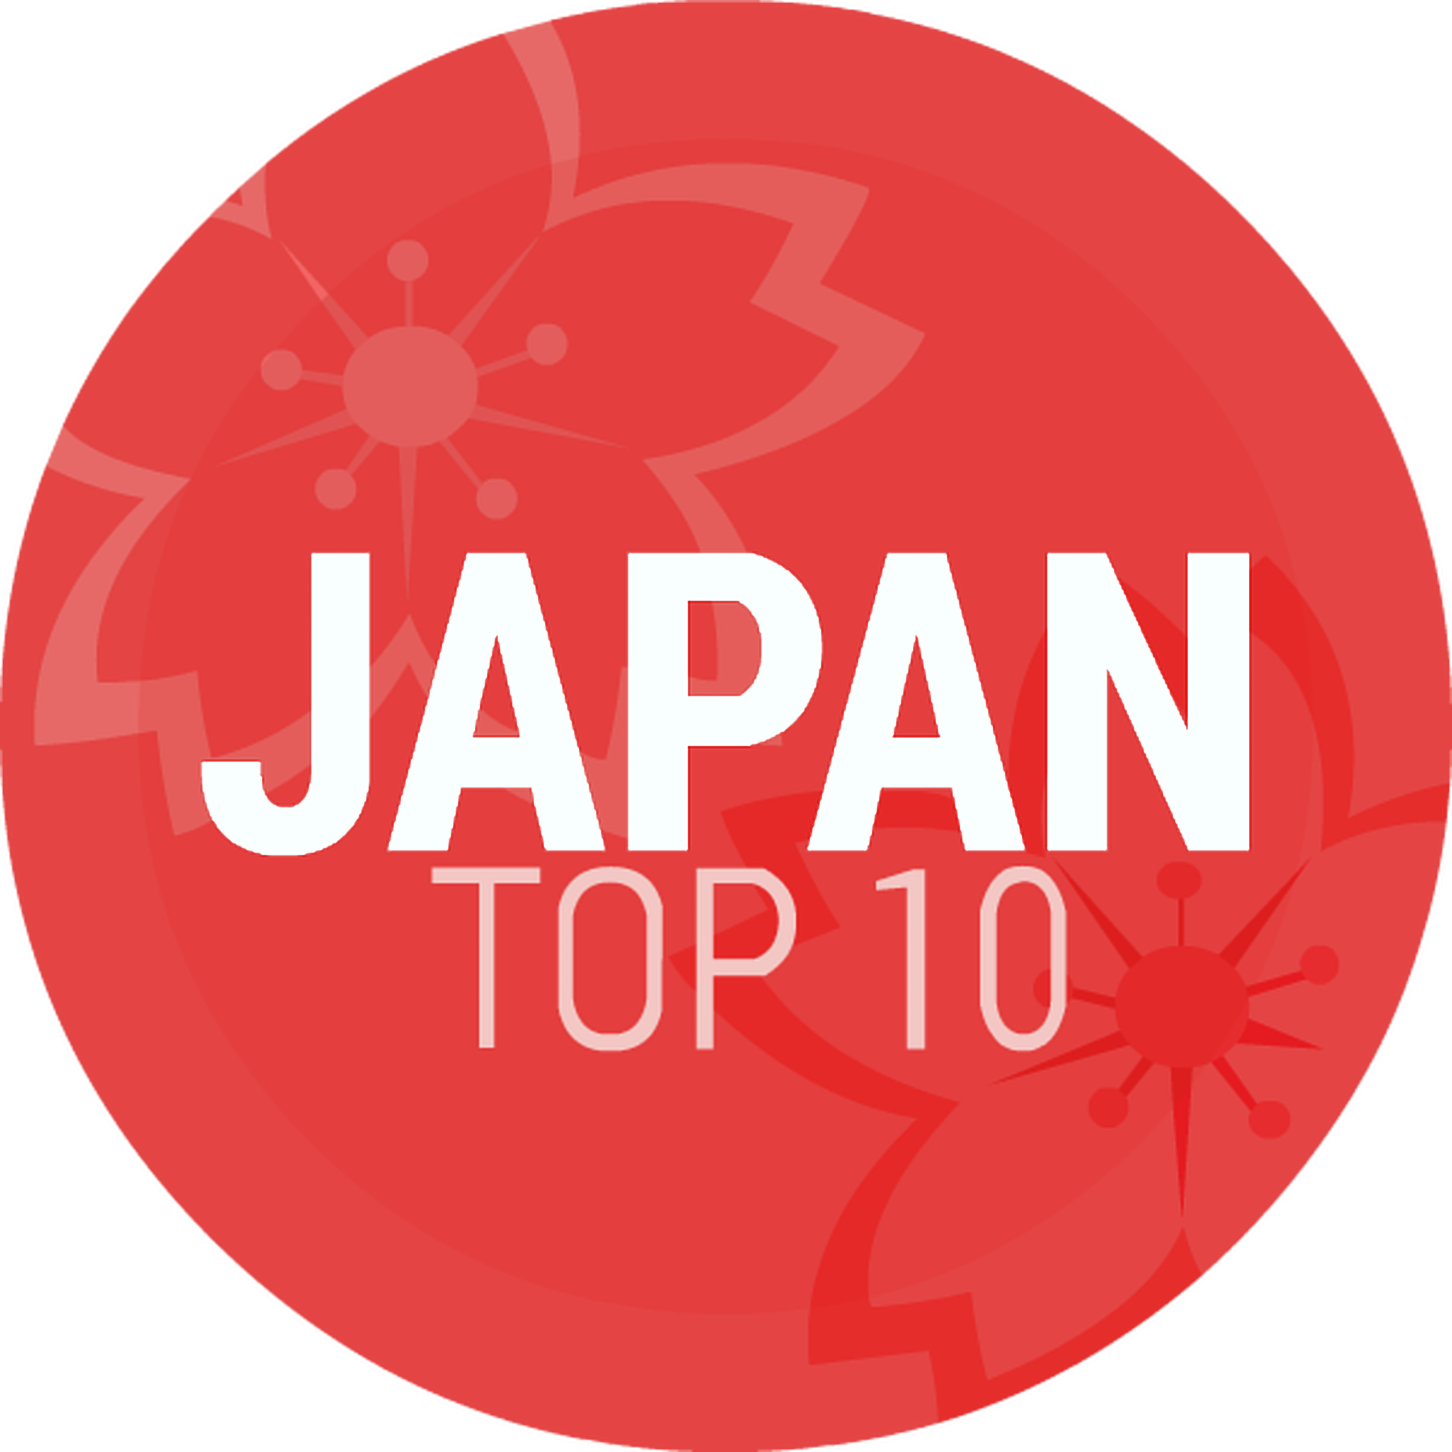 Episode 222: Japan Top 10 Mid/Late February 2018 Countdown